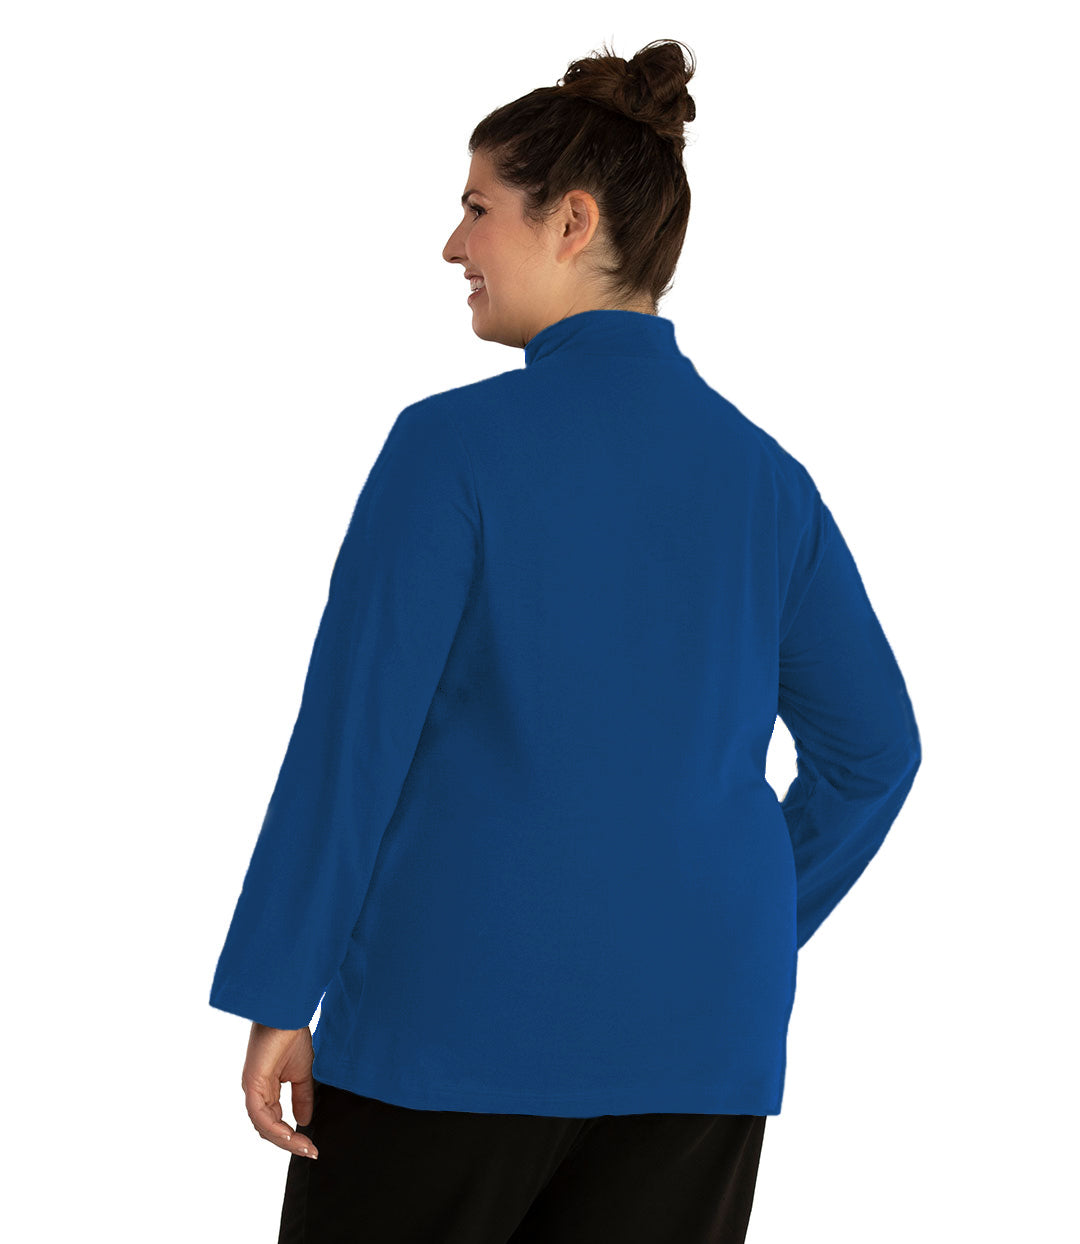 Plus size woman, facing back looking left, wearing JunoActive plus size Stretch Naturals Lite Mock Neck Top in the color Cozy Blue. She is wearing JunoActive Plus Size Leggings in the color Black.